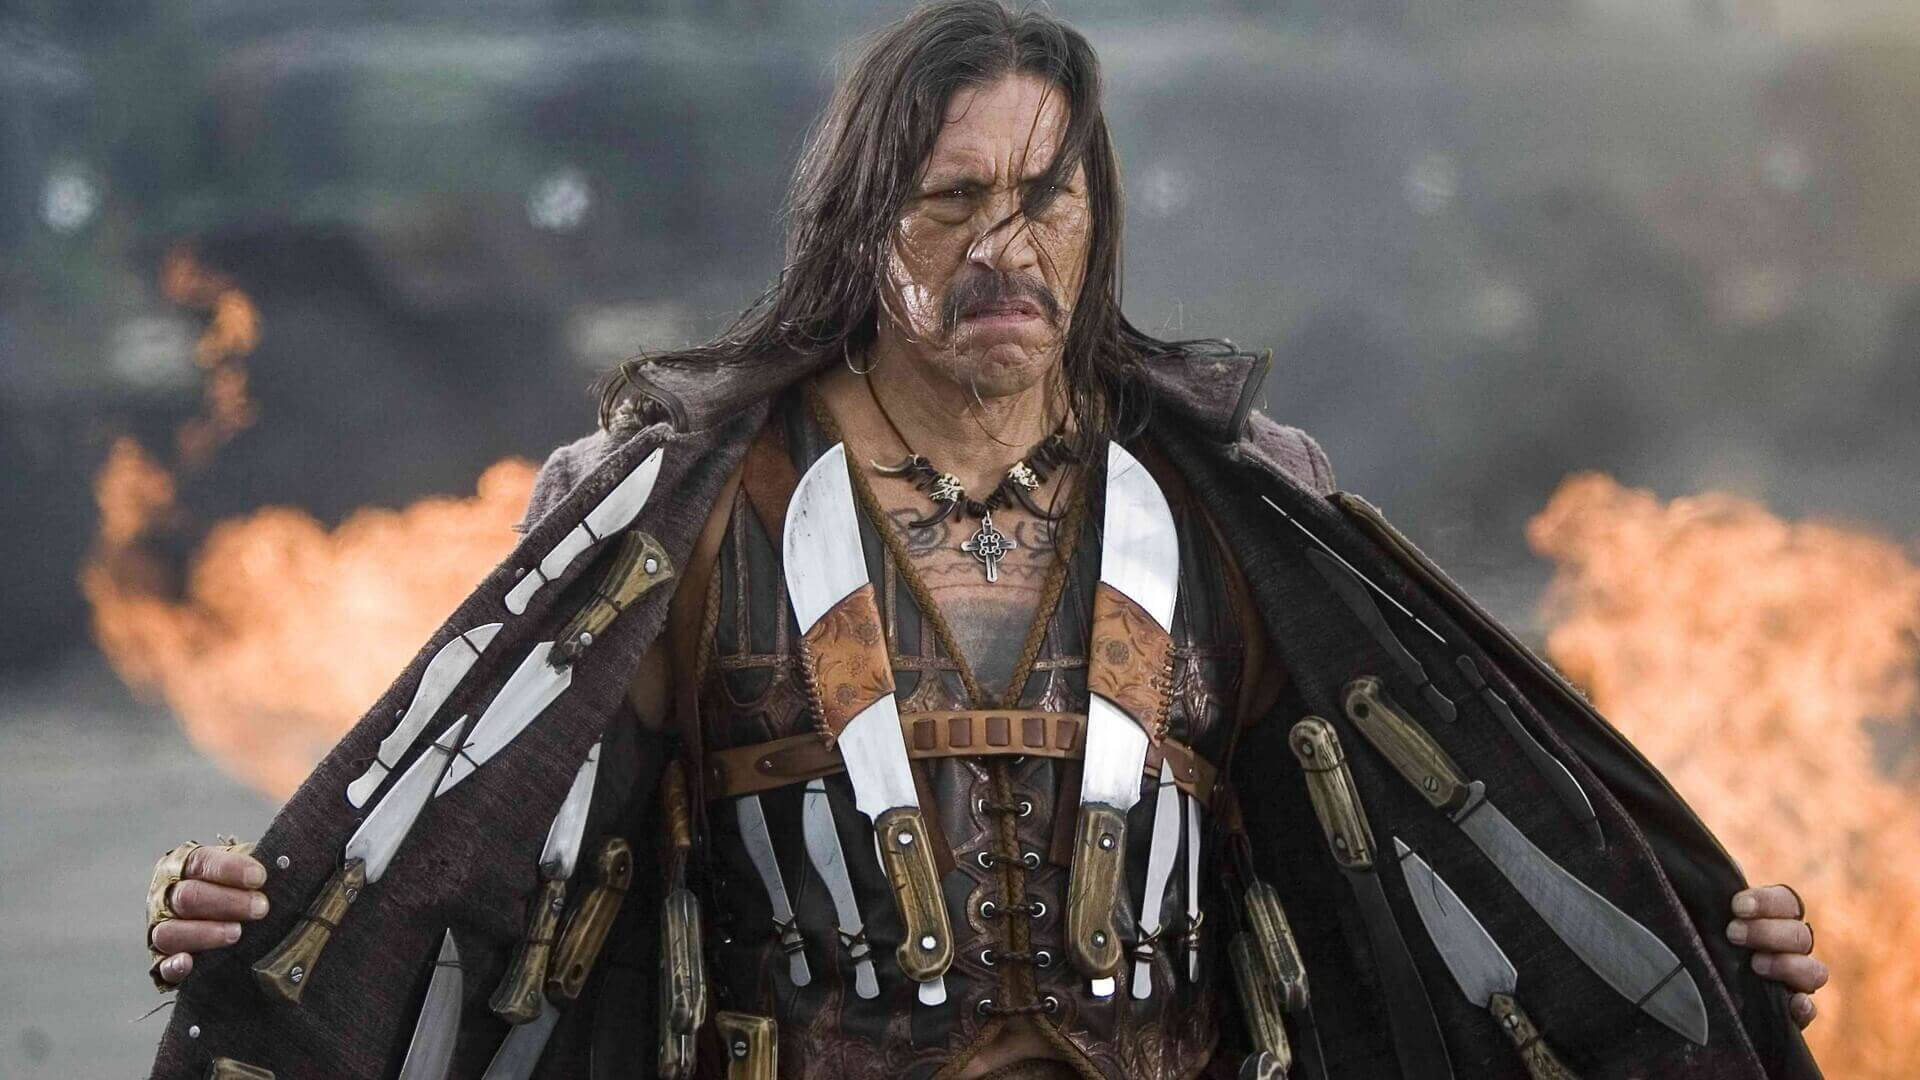 Danny Trejo With Weapons As Machete Background